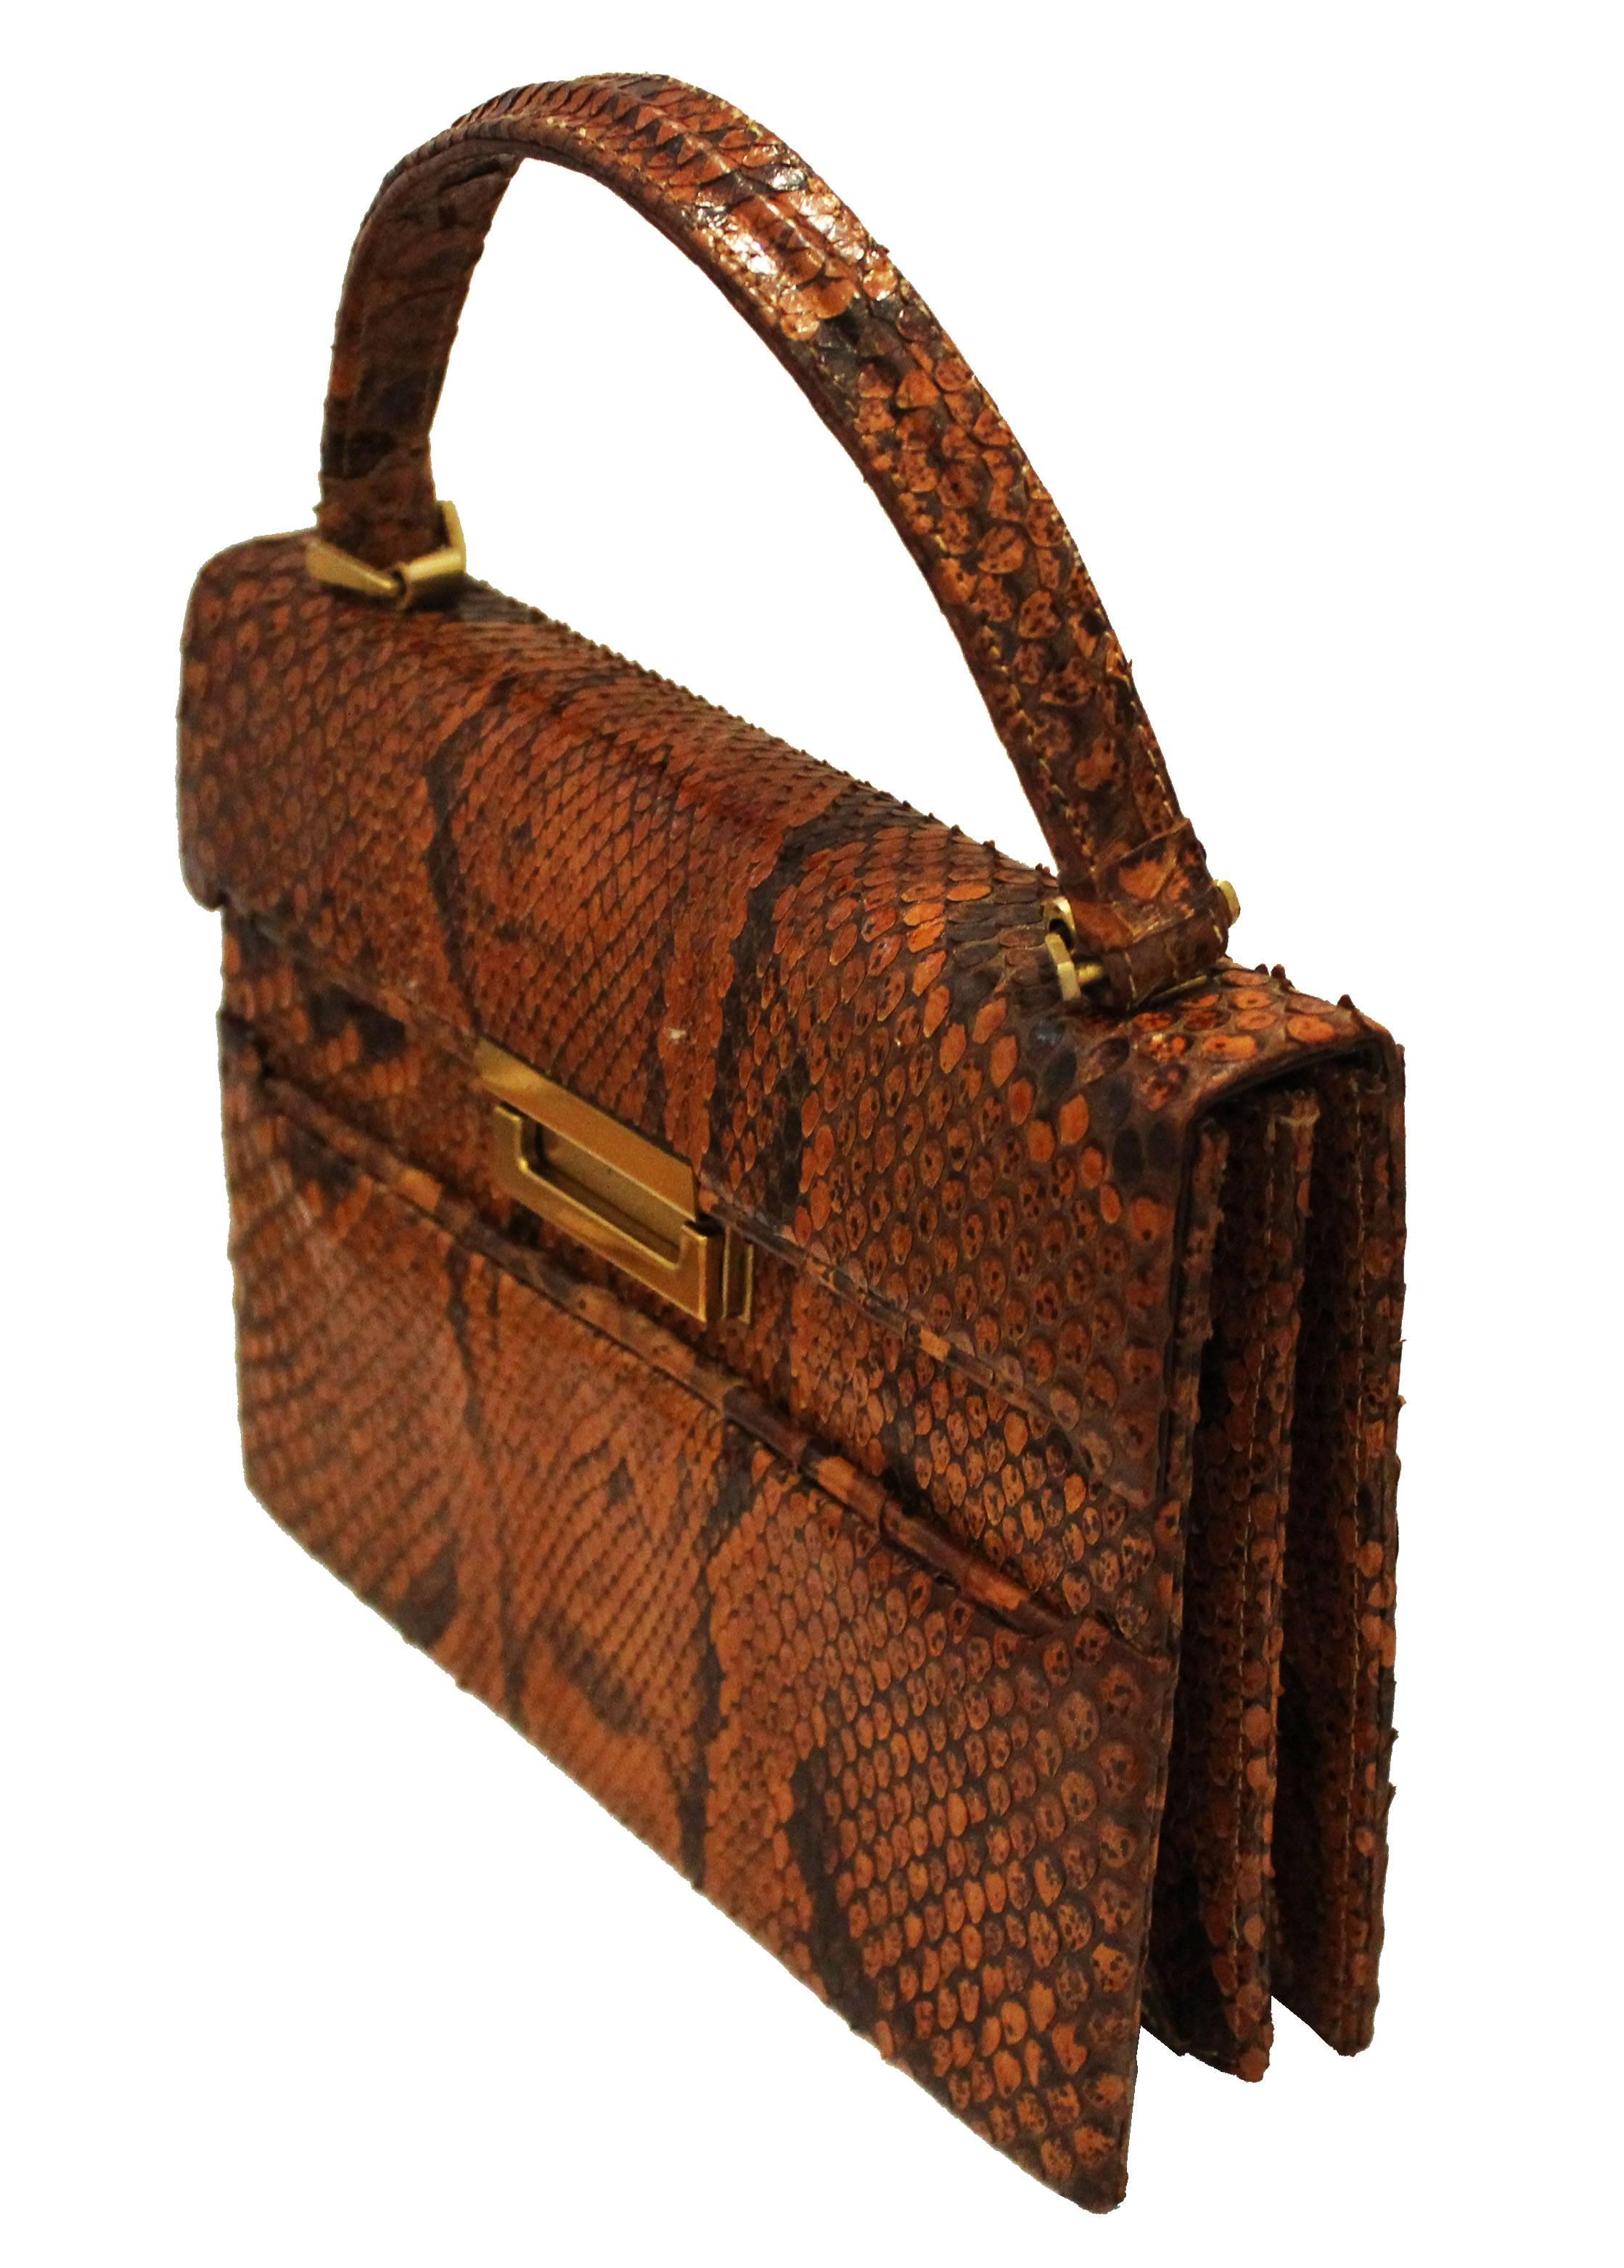 A charming and chic vintage handbag from the 1940s,in tan and dark brown snakeskin. This handbag has a foldover top, and central gilt clasp. There is an external pouch pocket. The interior is leather lined, and has two compartments each with a pouch